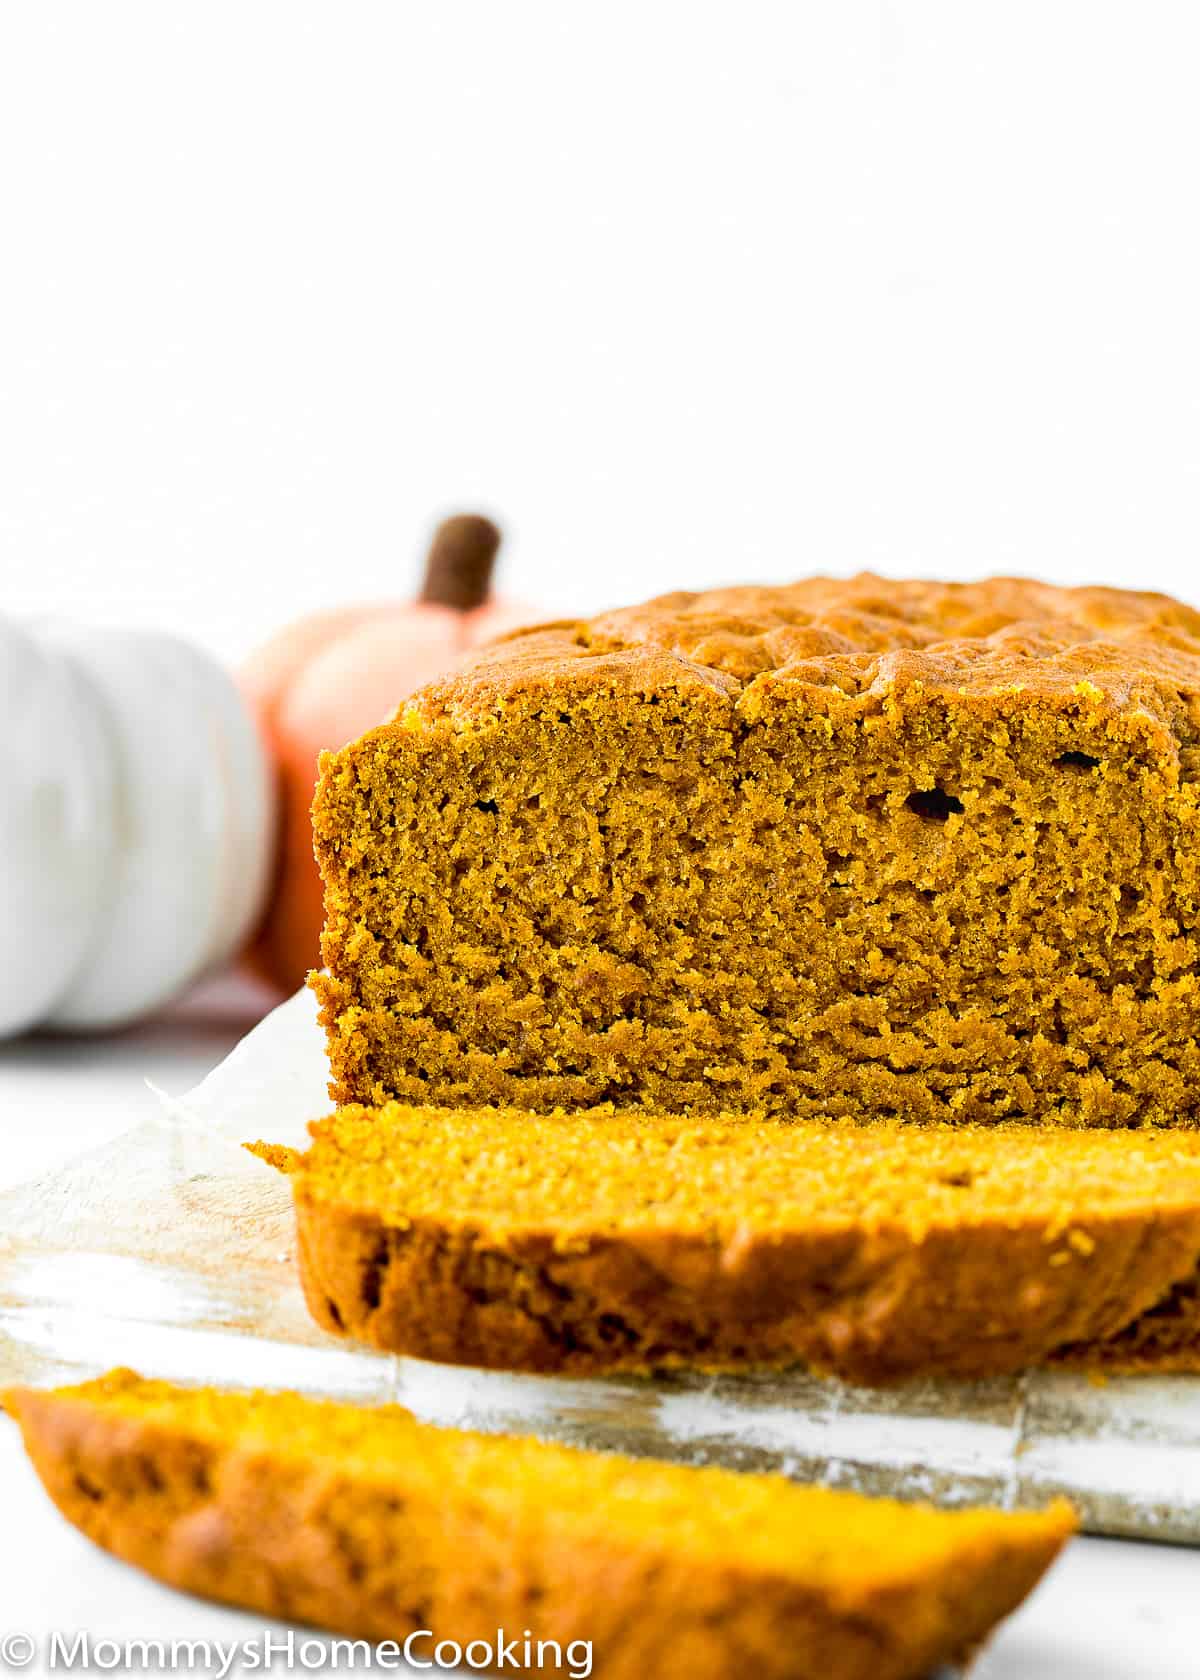 Eggless Pumpkin Bread sliced showing dense and perfect texture